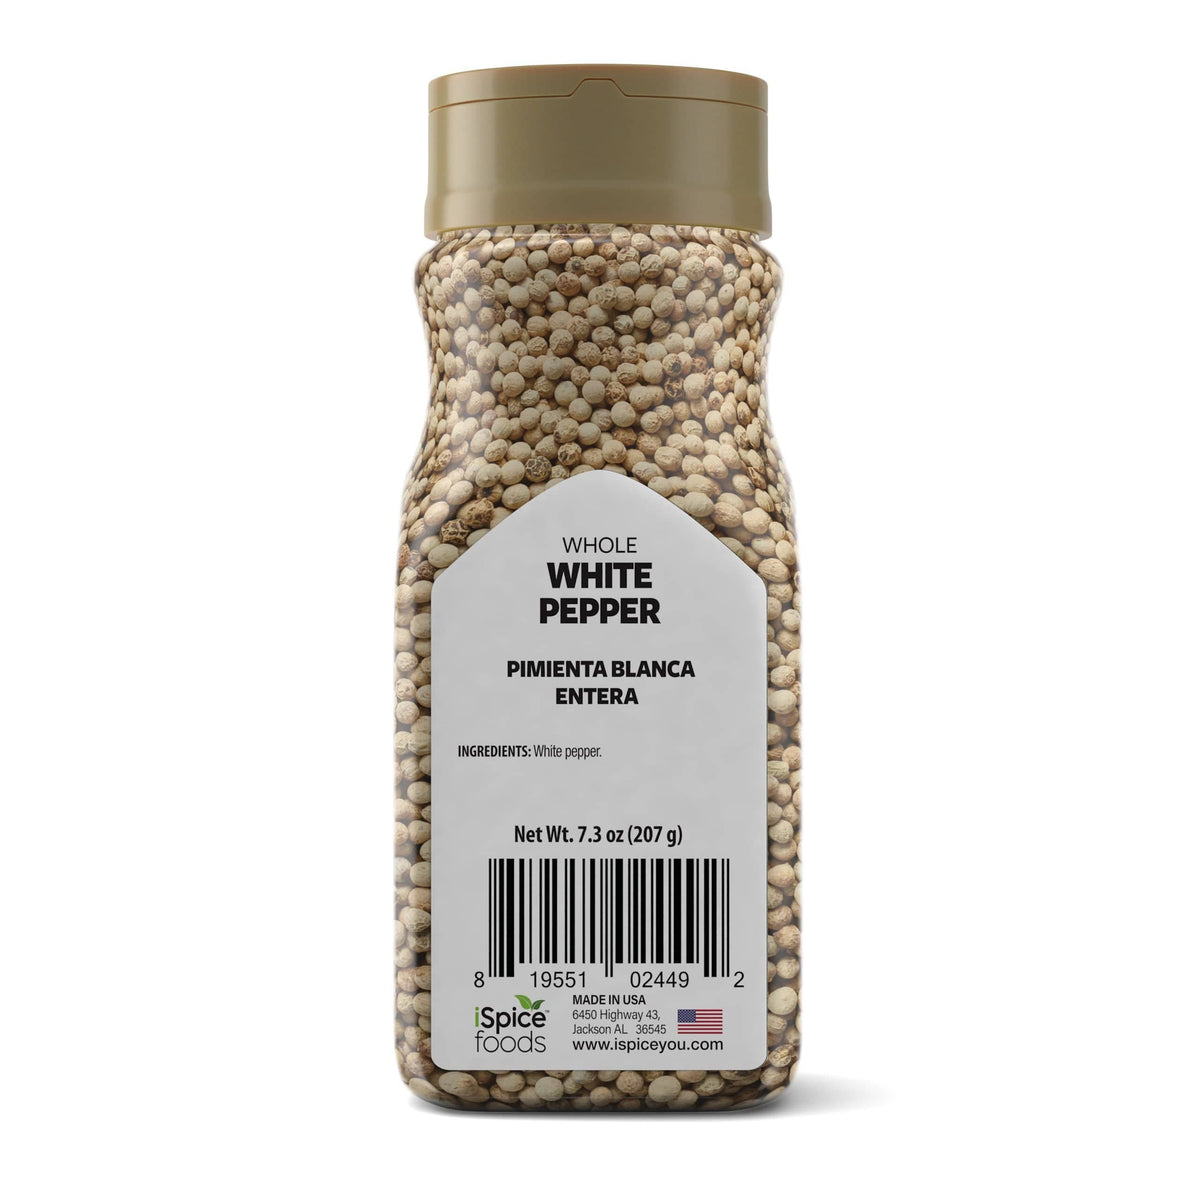 Discover the Benefits of Whole White Pepper Today 